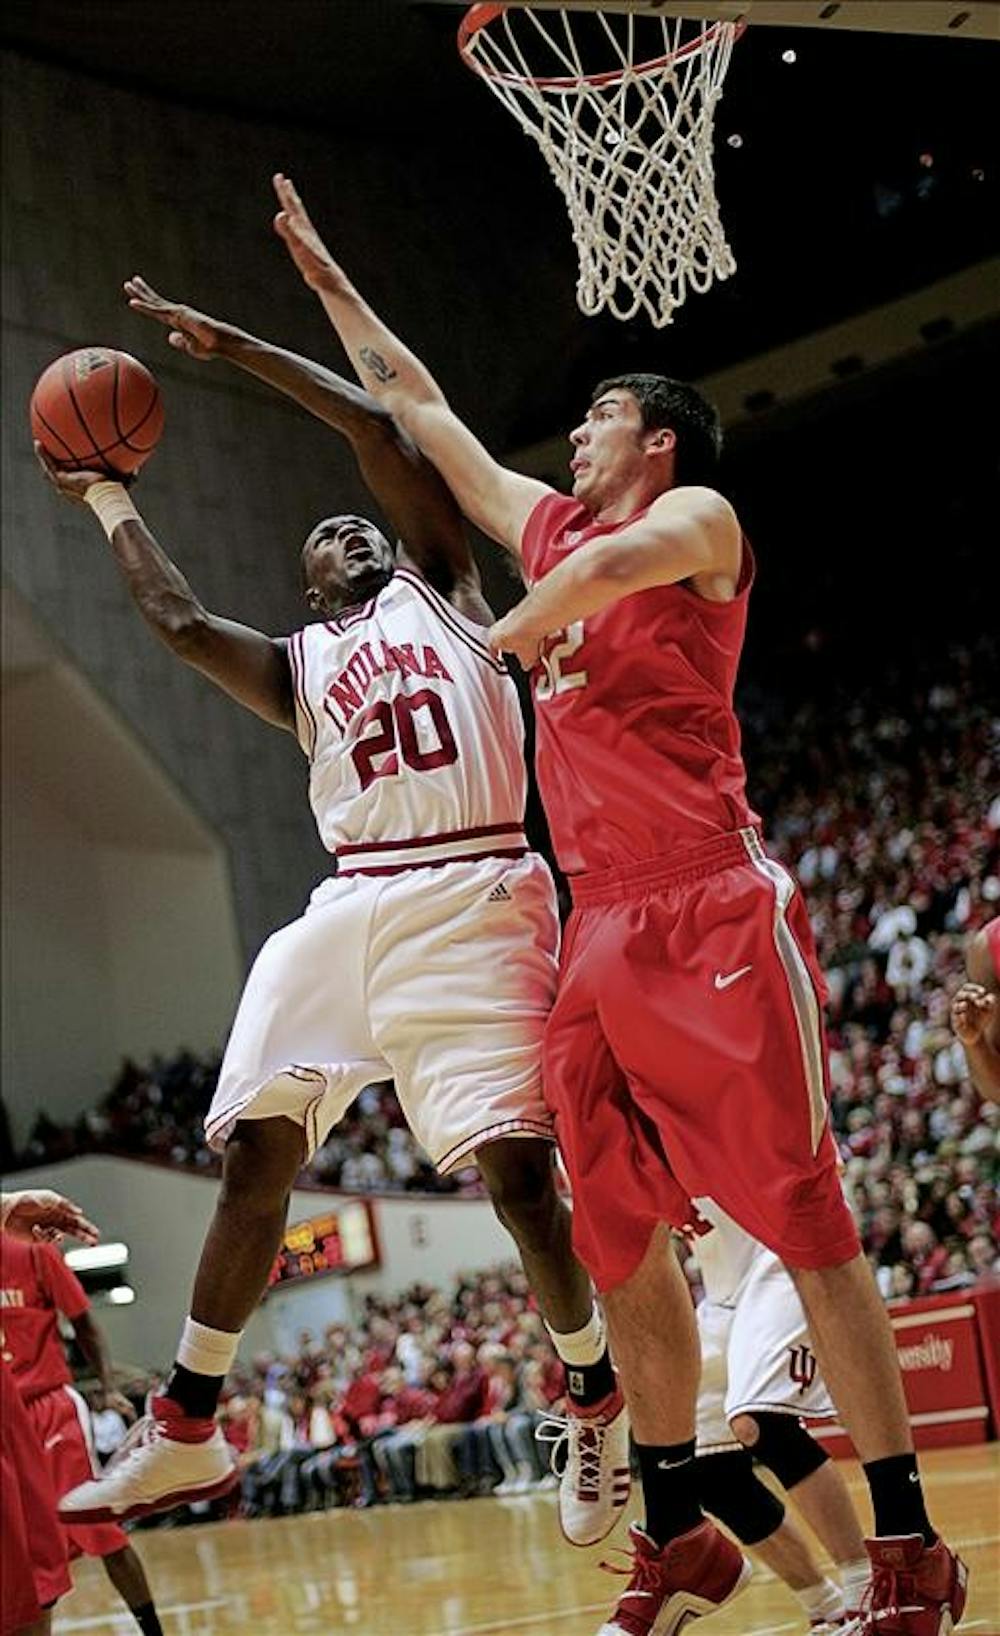 Freshman guard Nick Williams fights off a Buckeye defender during a shot attempt Saturday afternoon at Assembly Hall. The Hoosiers fell to Ohio State 93-81.